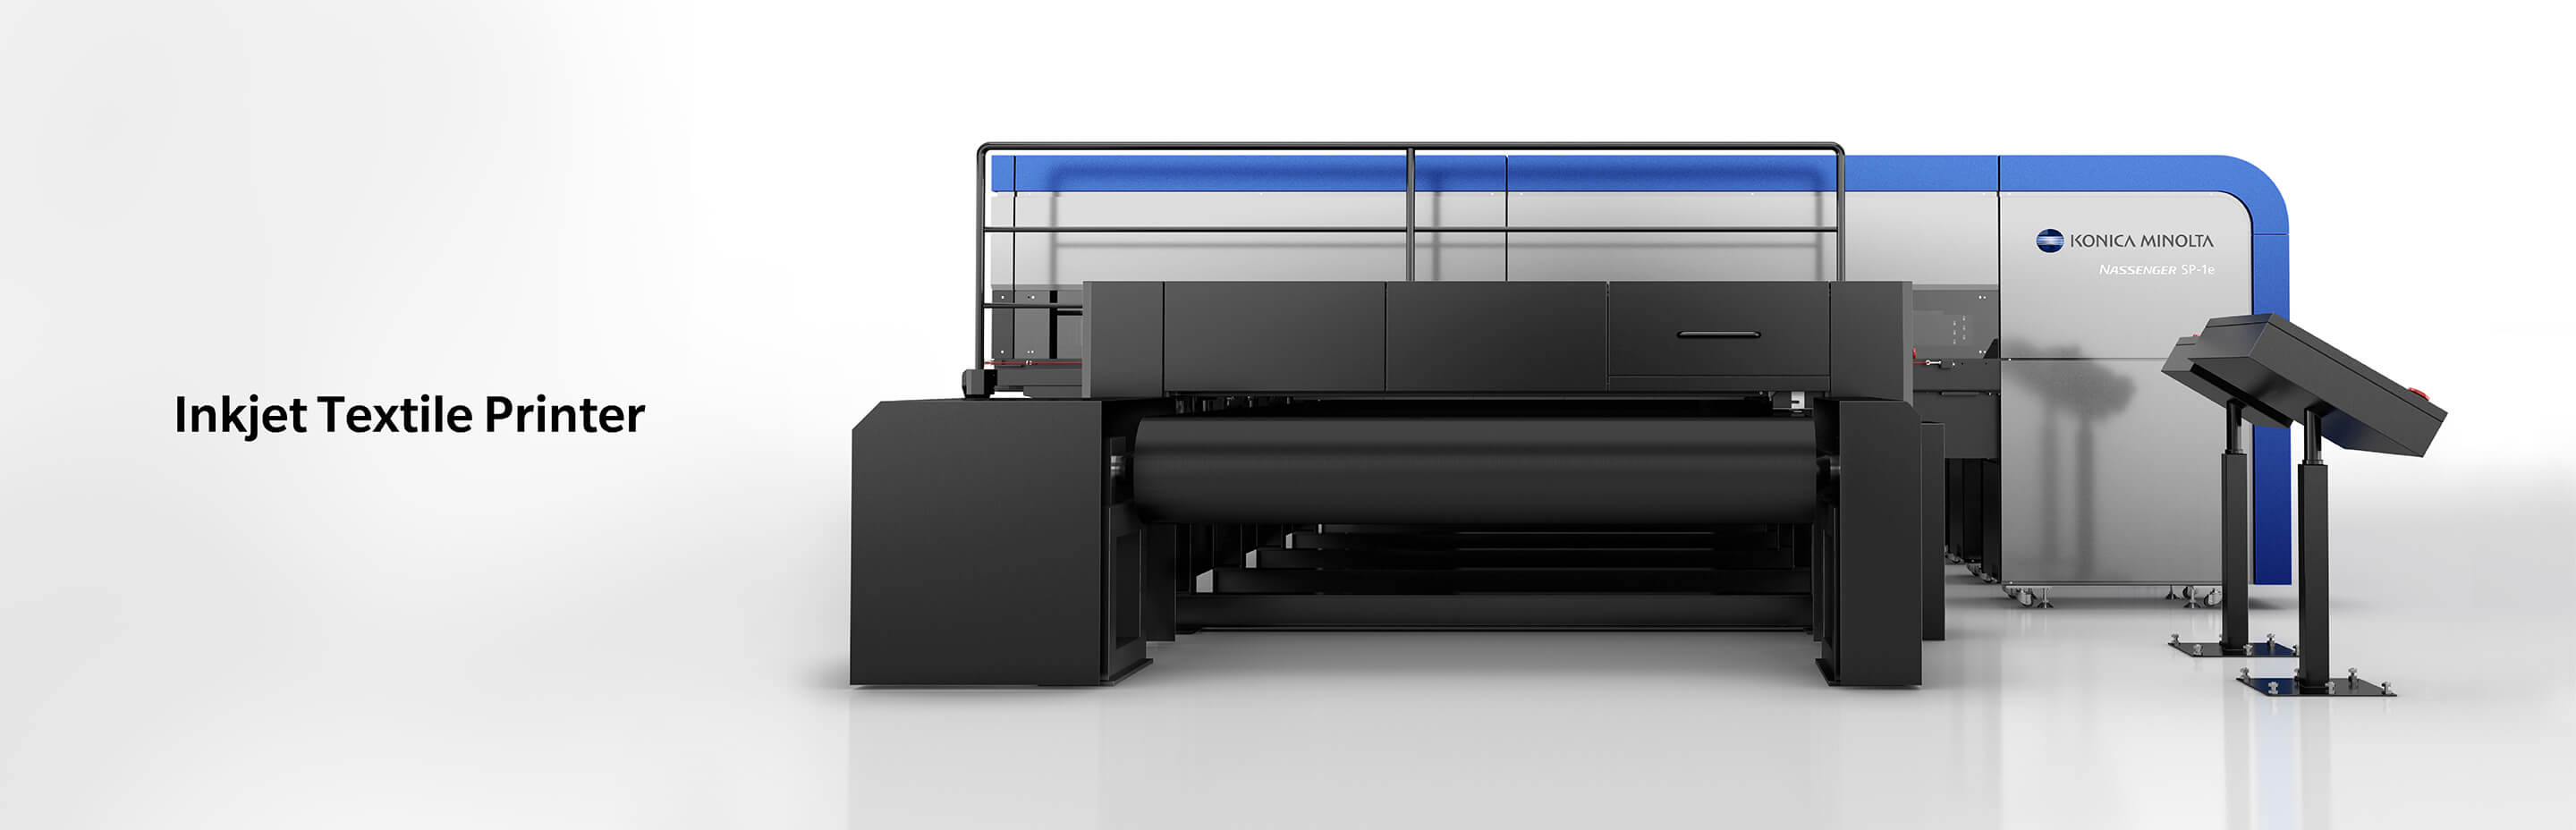 Products｜Inkjet Textile Printer-Products-Industrial Inkjet KONICA